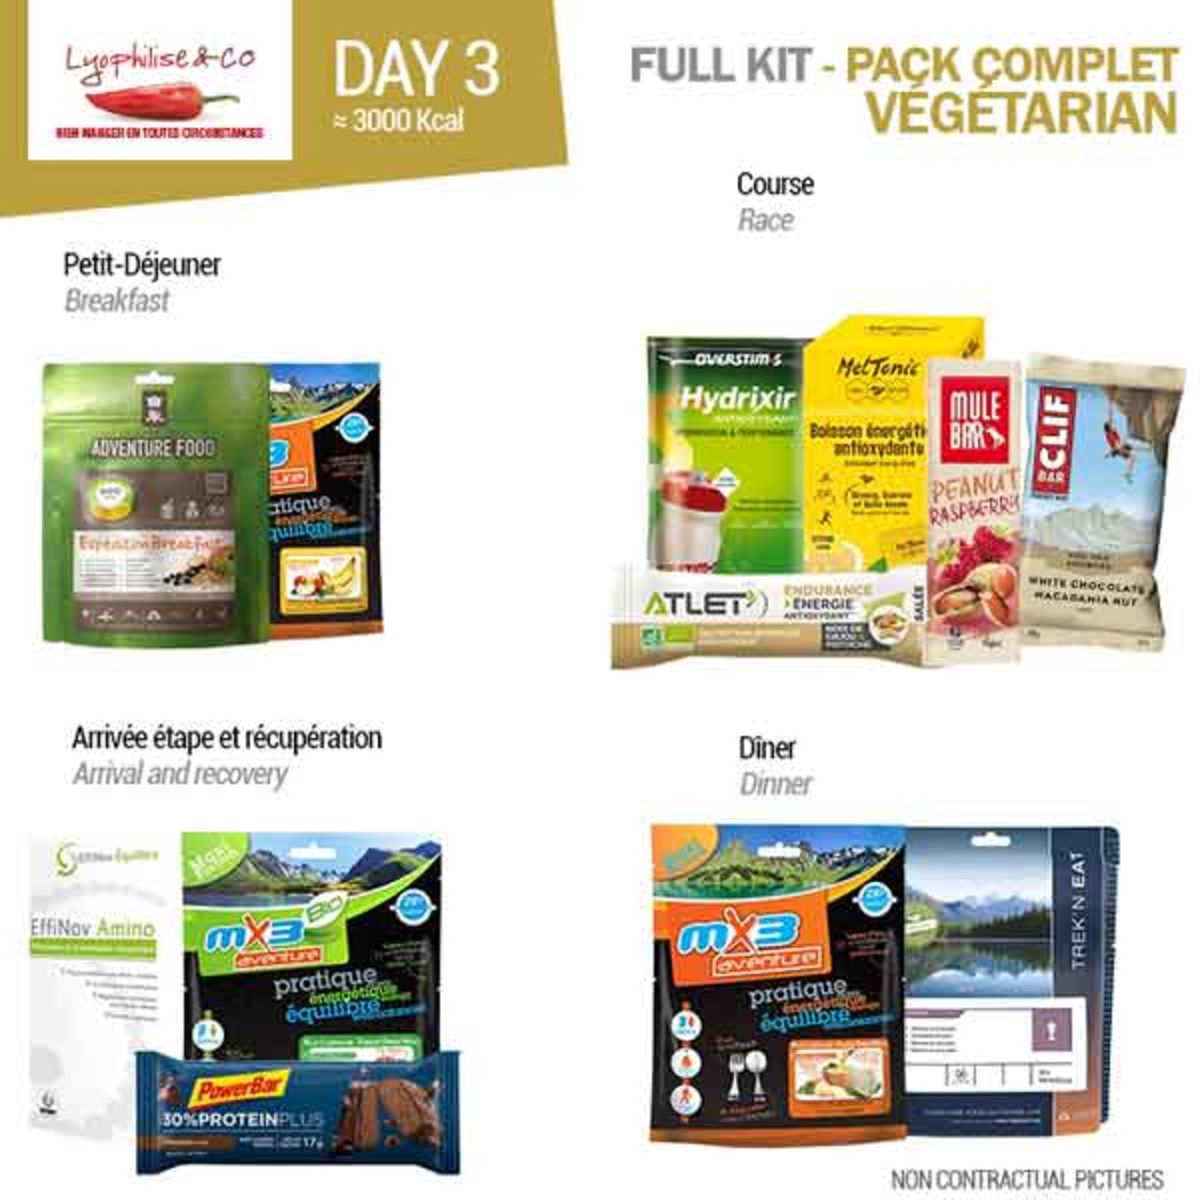 Vegetarian 7-day pack - Ultra-trail - 2700 kcal/day